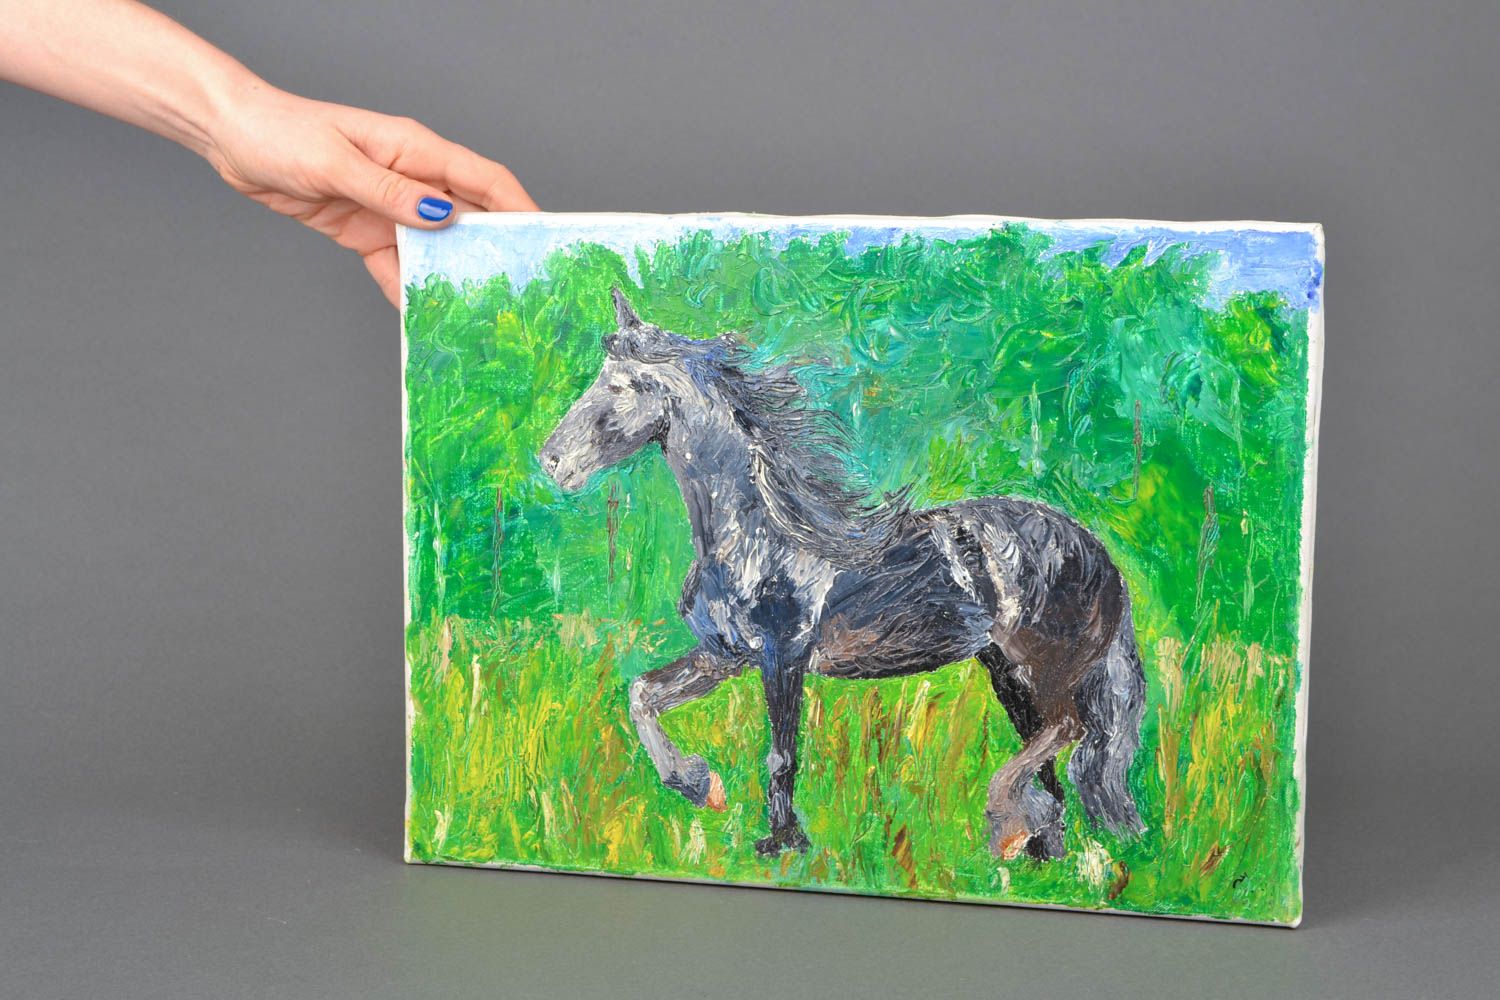 Oil picture of horse photo 2